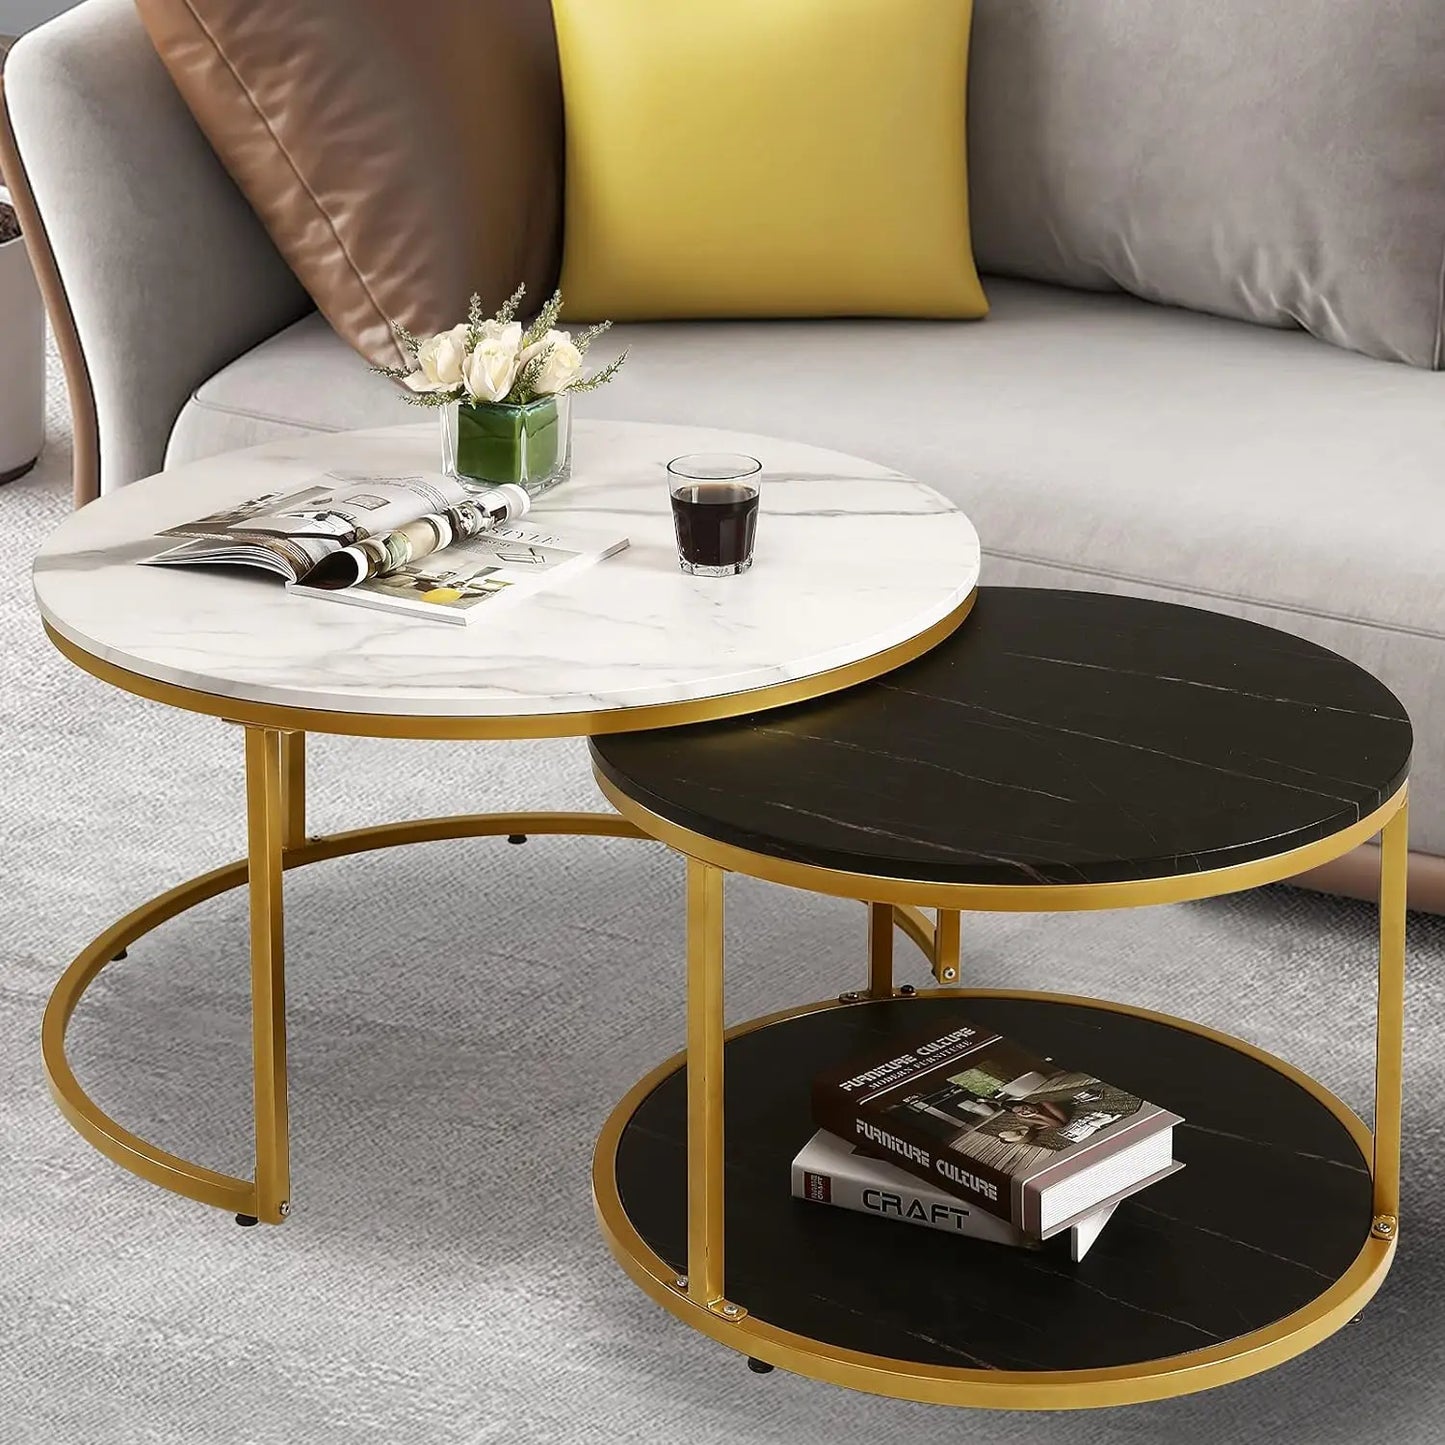 NSdirect Nesting Coffee Table Set of 2,Round Coffee Tables Modern Circle Table for Living Room Accent End Side Table